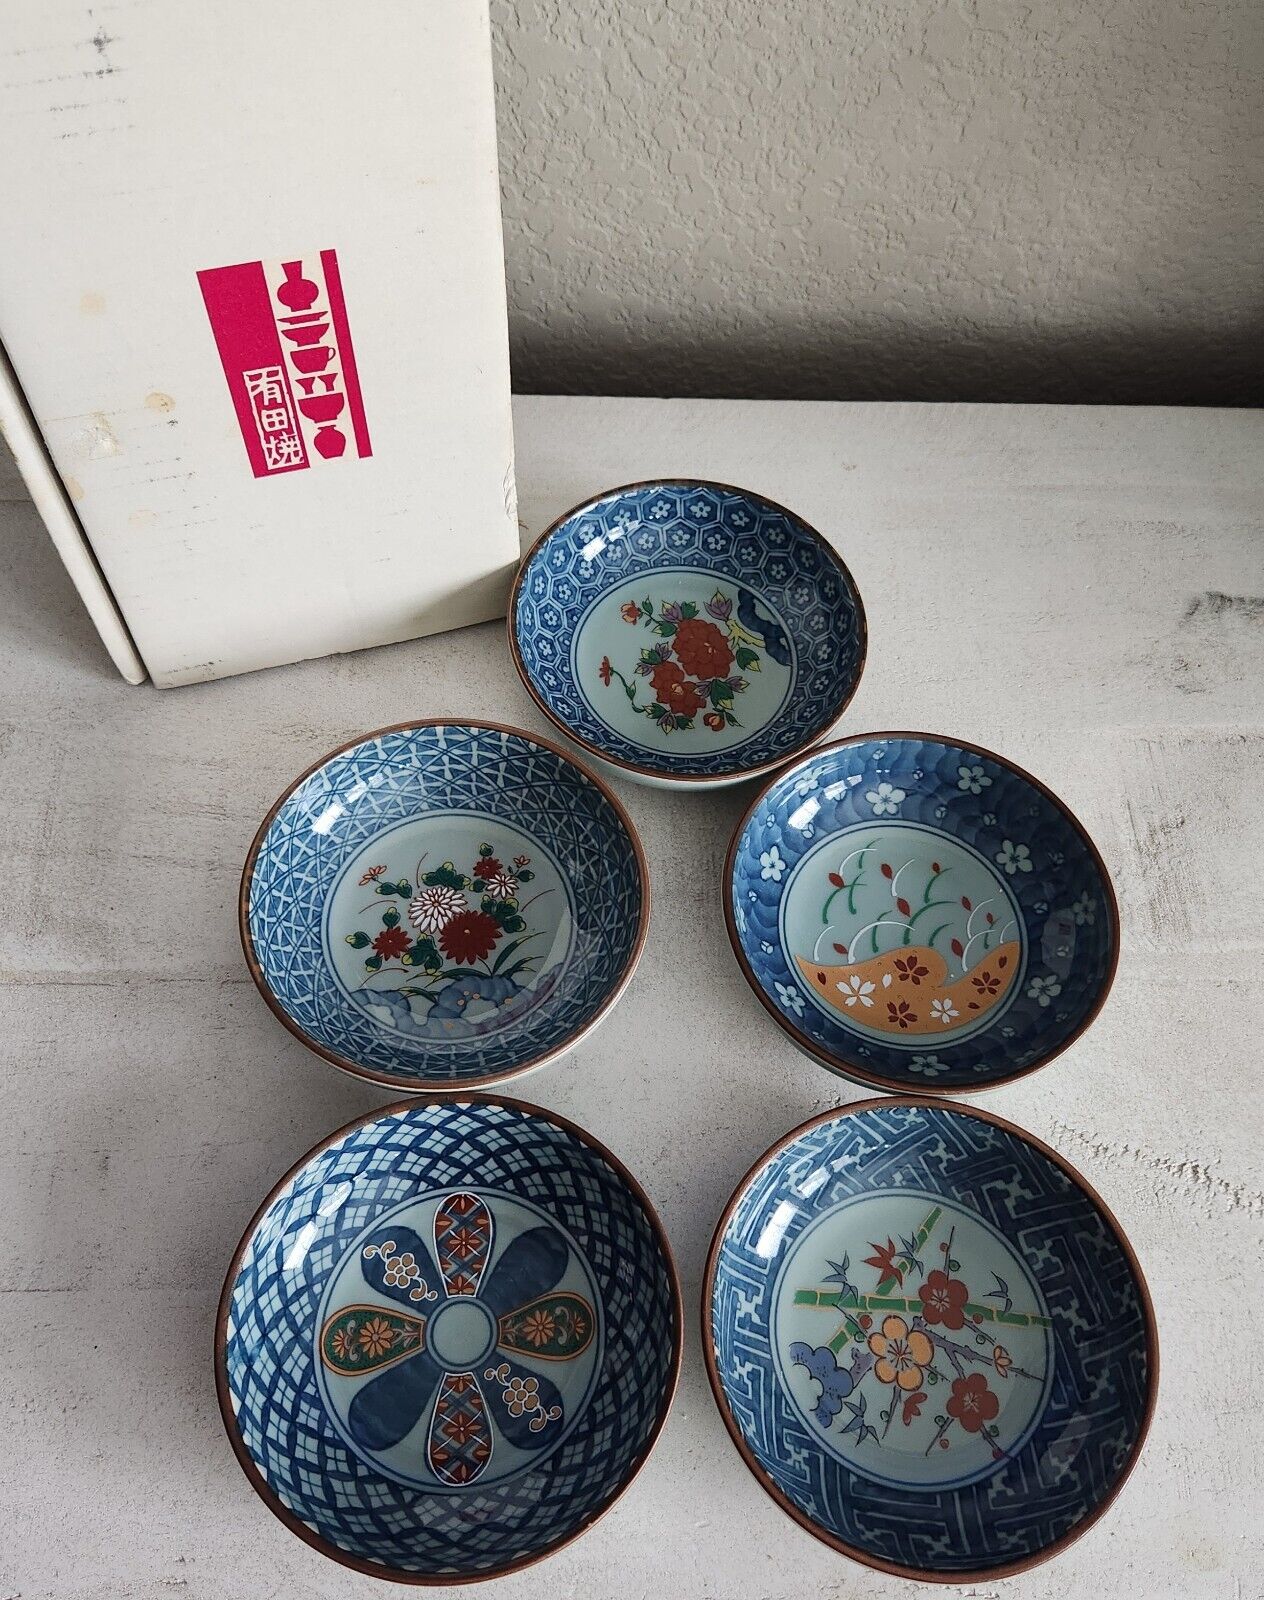 Vtg Japanese Arita Ware Porcelain Hand Painted Small Bowls 4 1/2 In - Set Of 5 